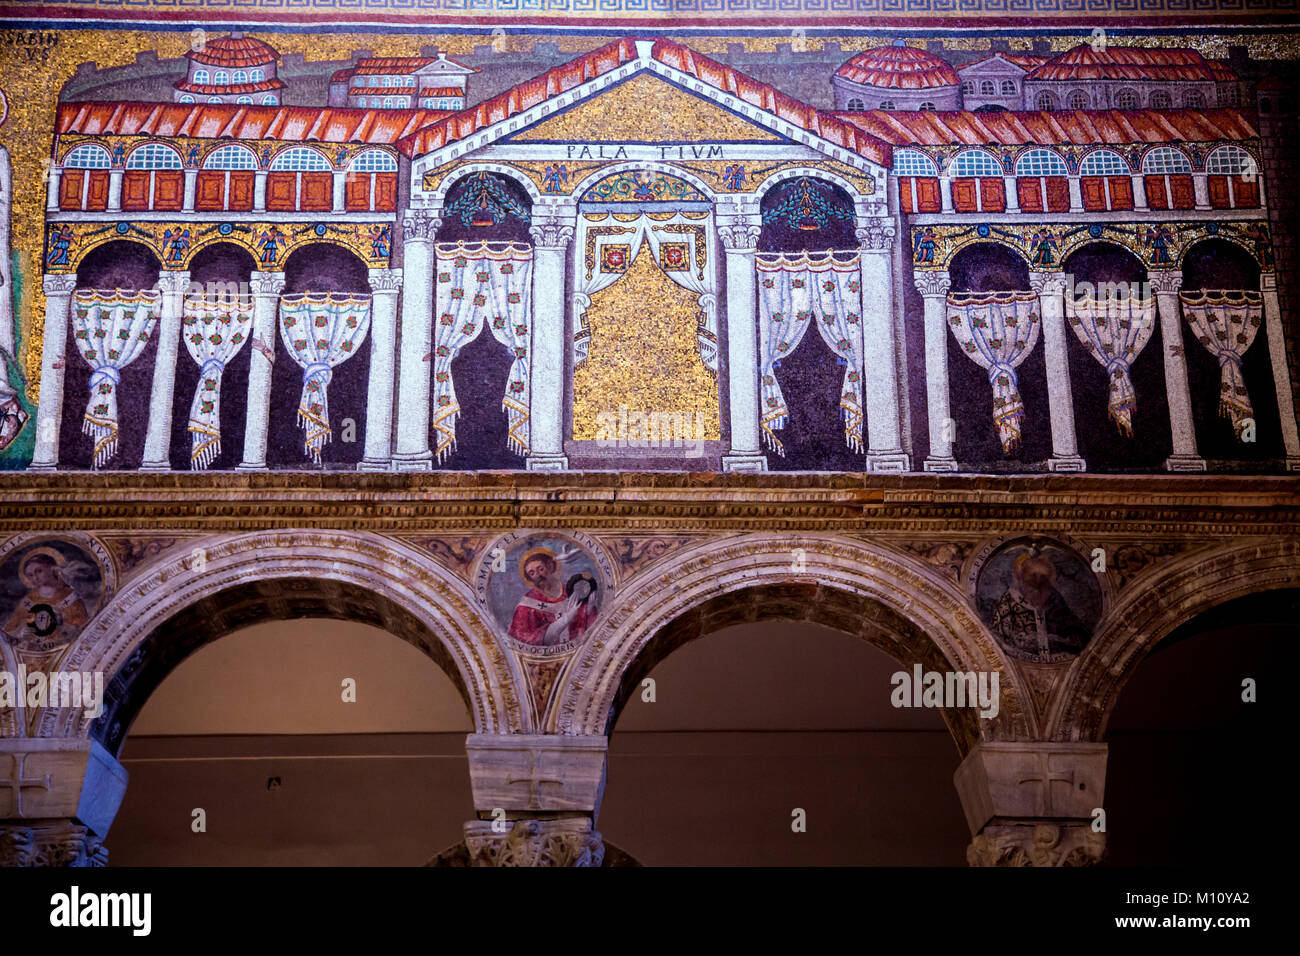 Mosaic of the Palace of Theodoric in Basilica Di Sant Apollinare Nuovo Italy Stock Photo